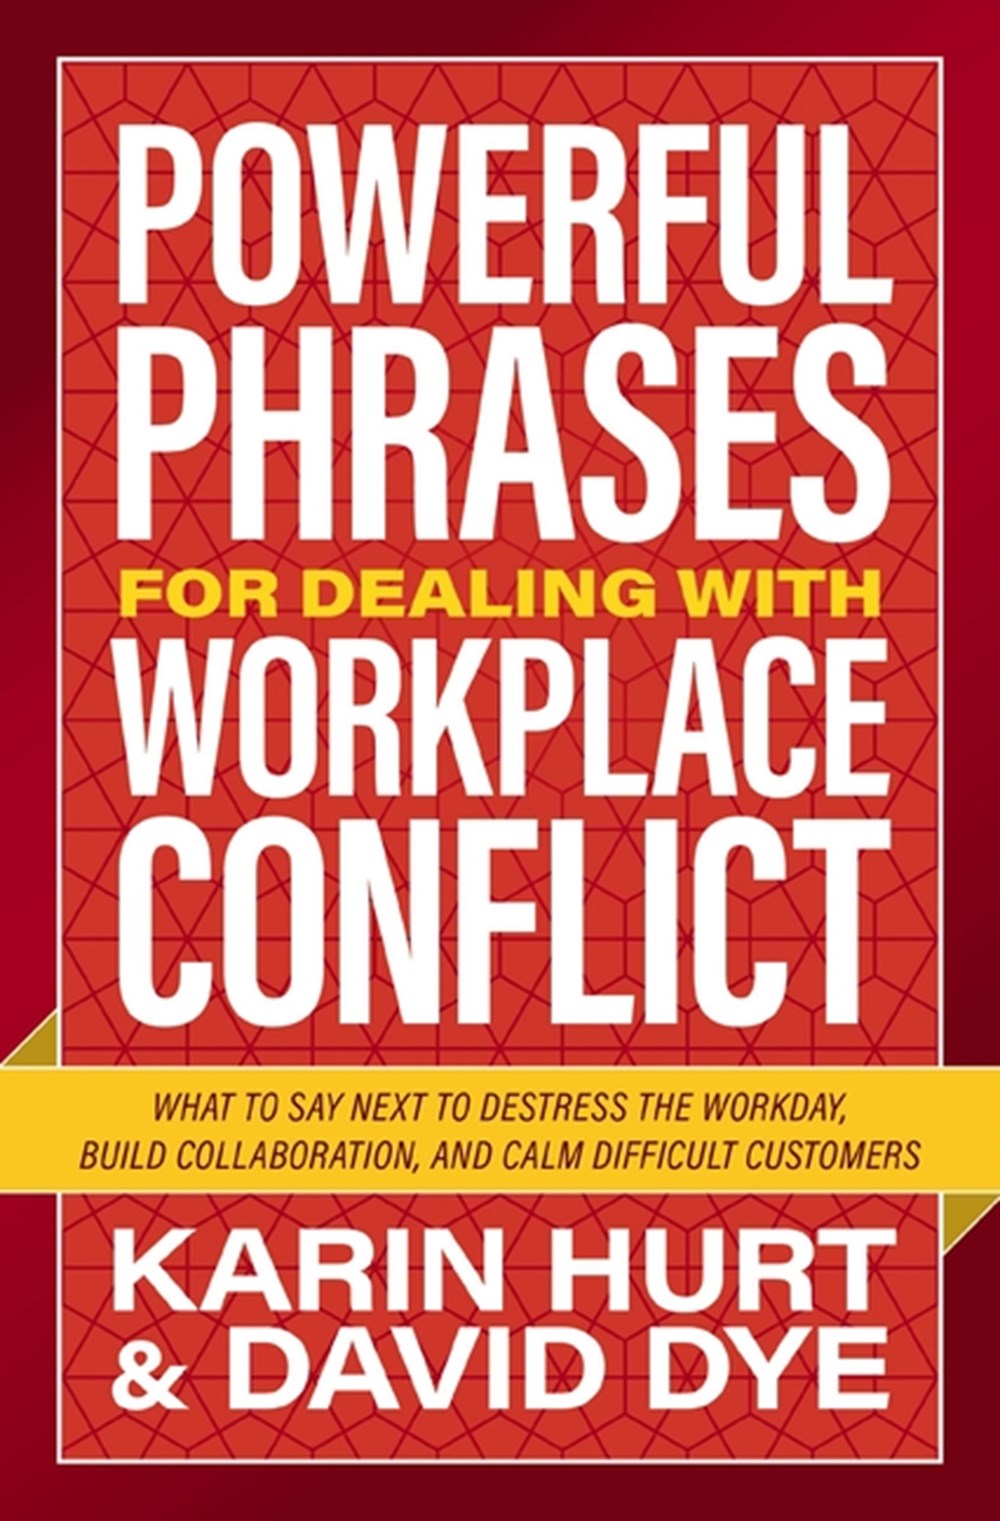 Powerful Phrases for Dealing with Workplace Conflict: What to Say Next to De-Stress the Workday, Bui